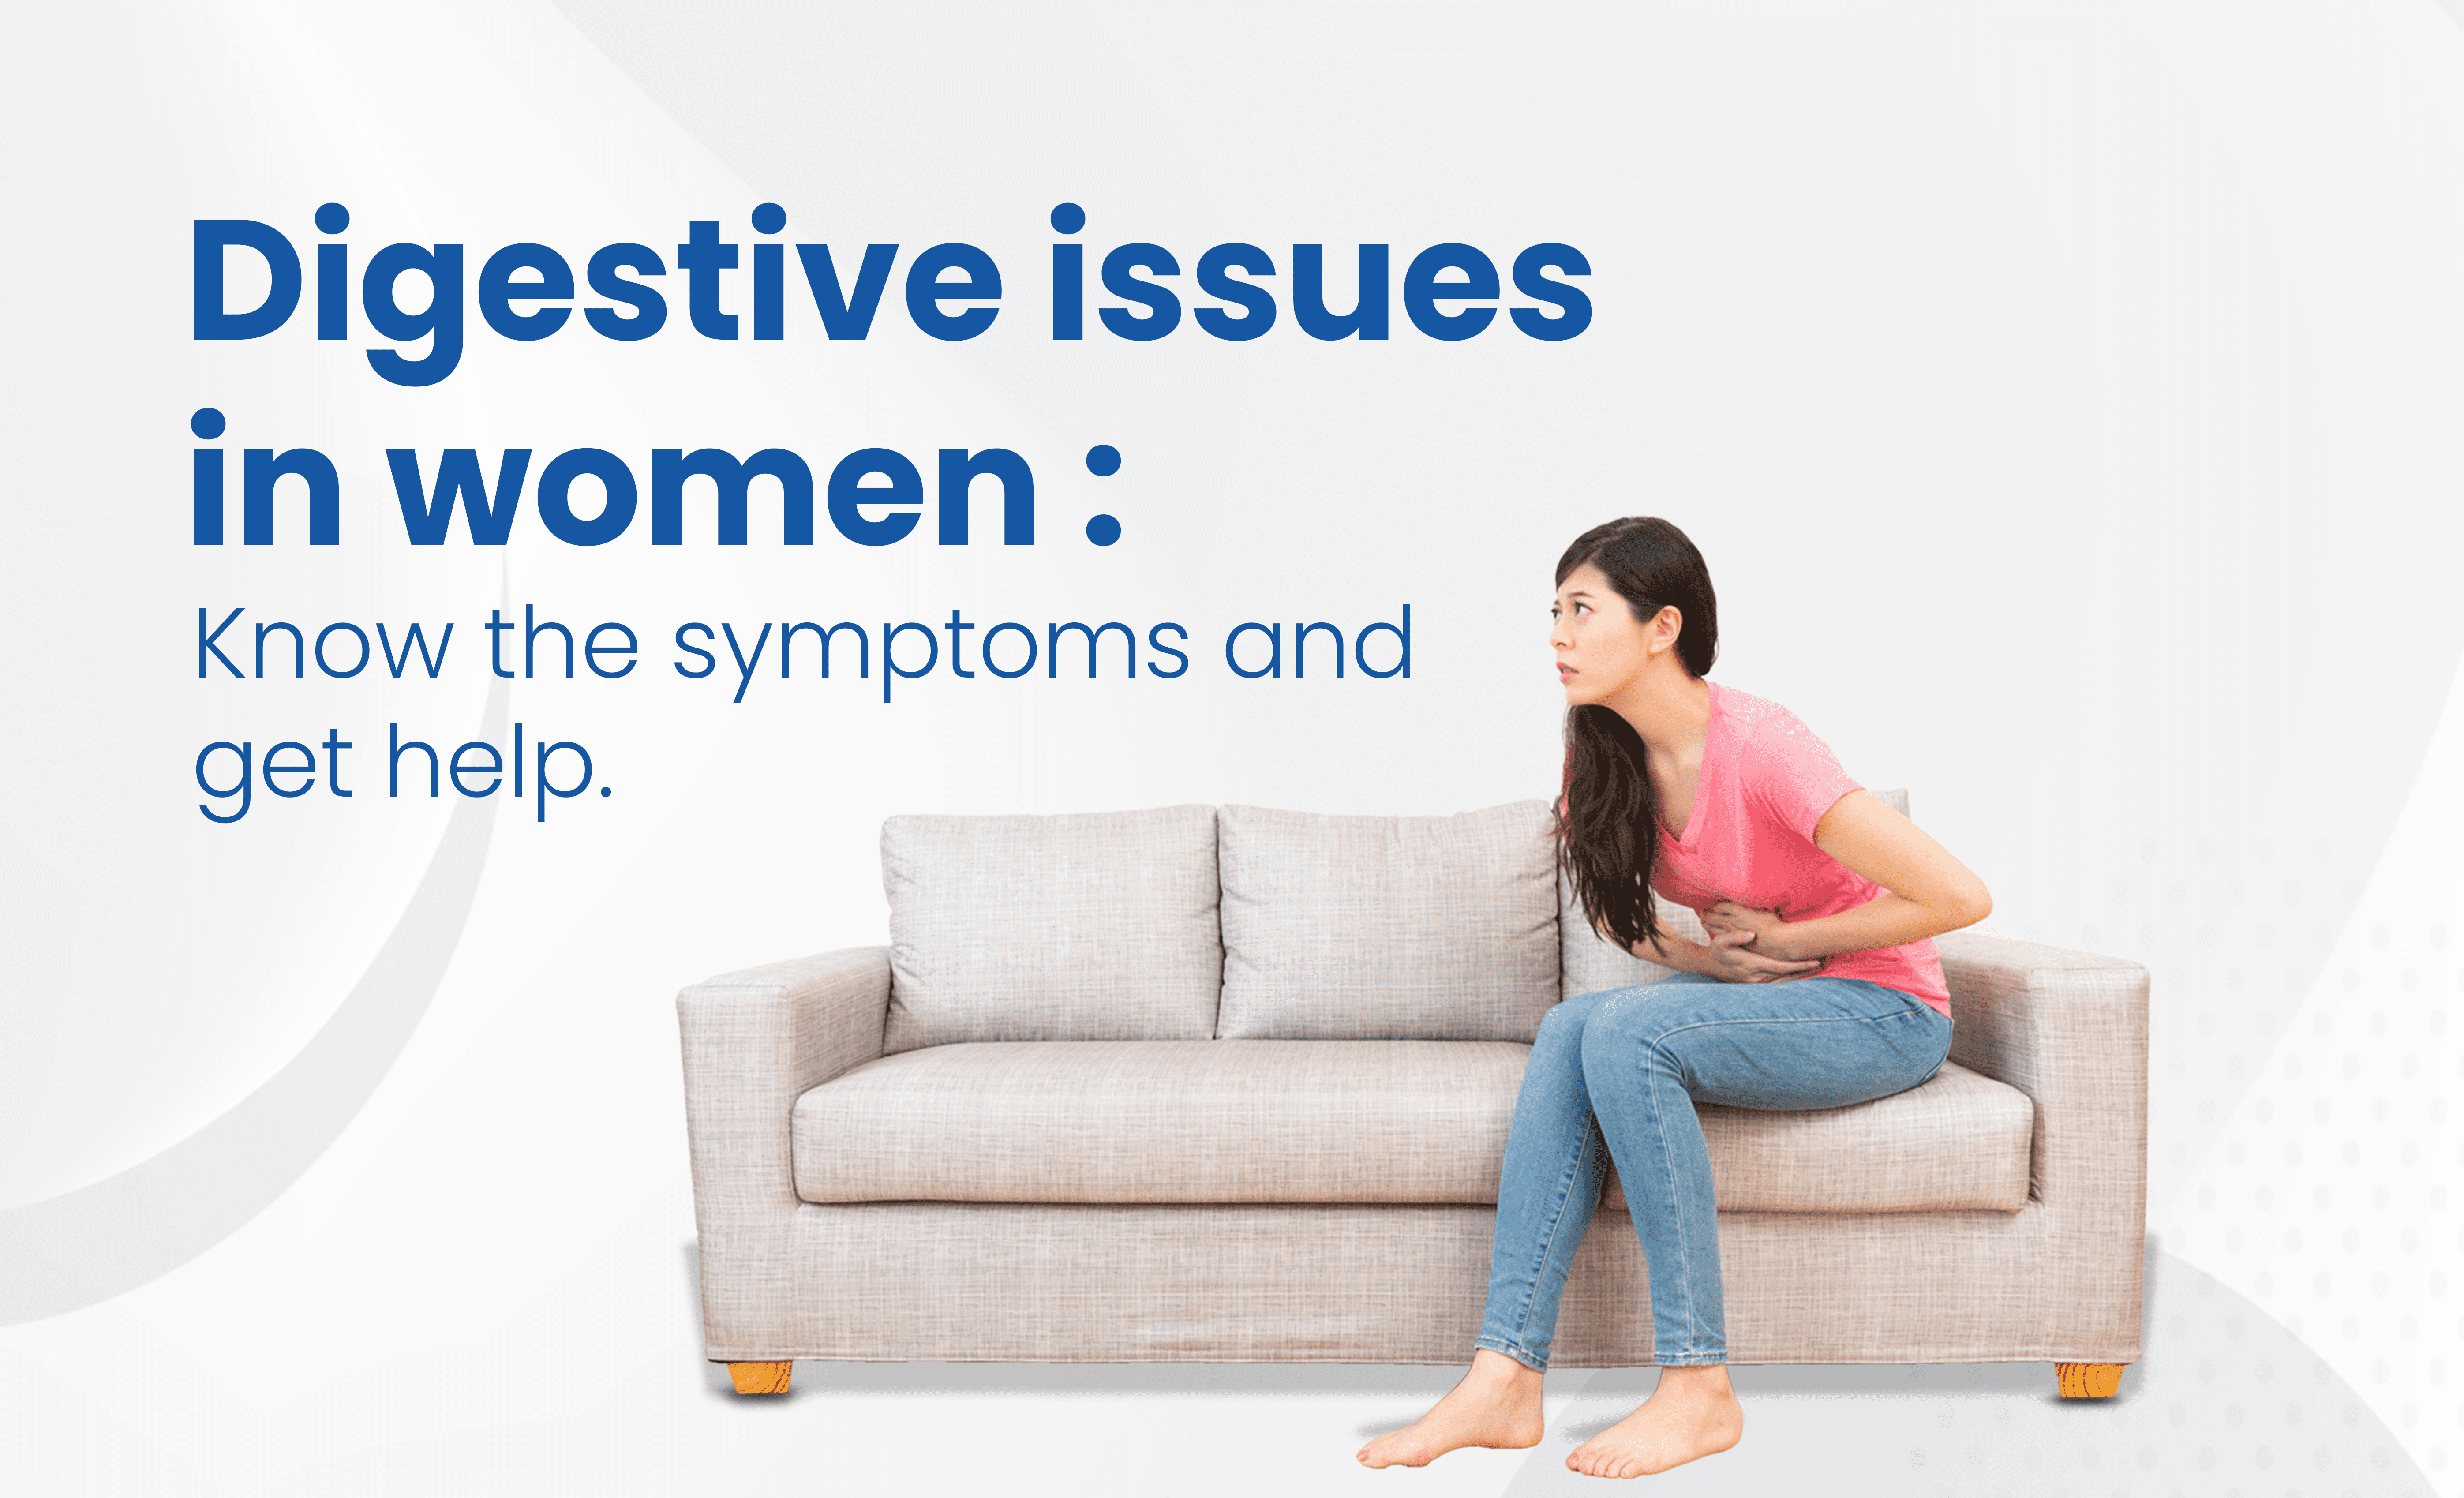 Digestive issues in women: Cover Image